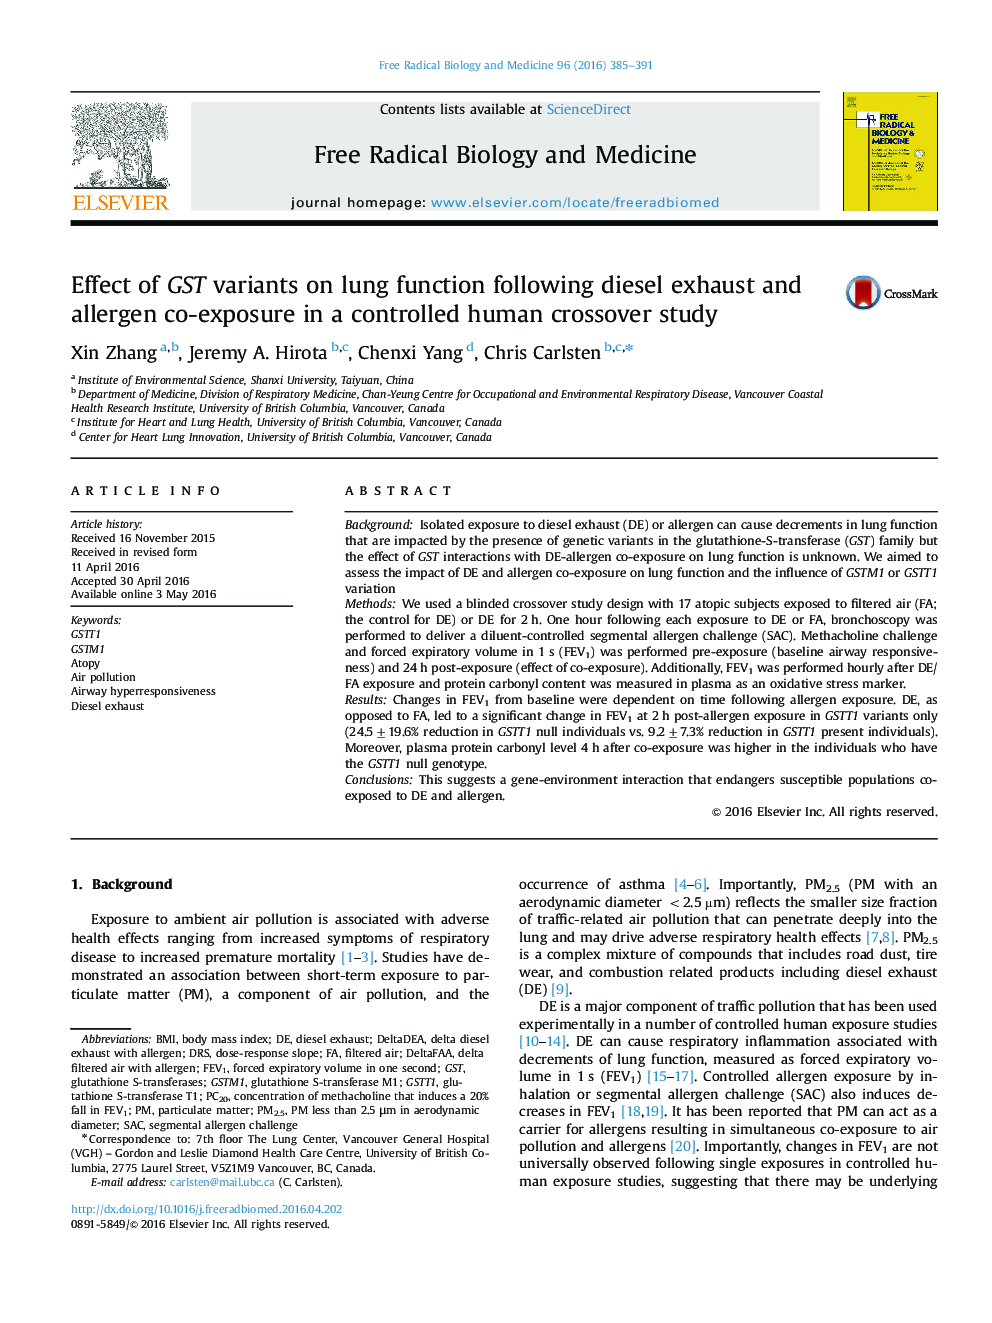 Effect of GST variants on lung function following diesel exhaust and allergen co-exposure in a controlled human crossover study